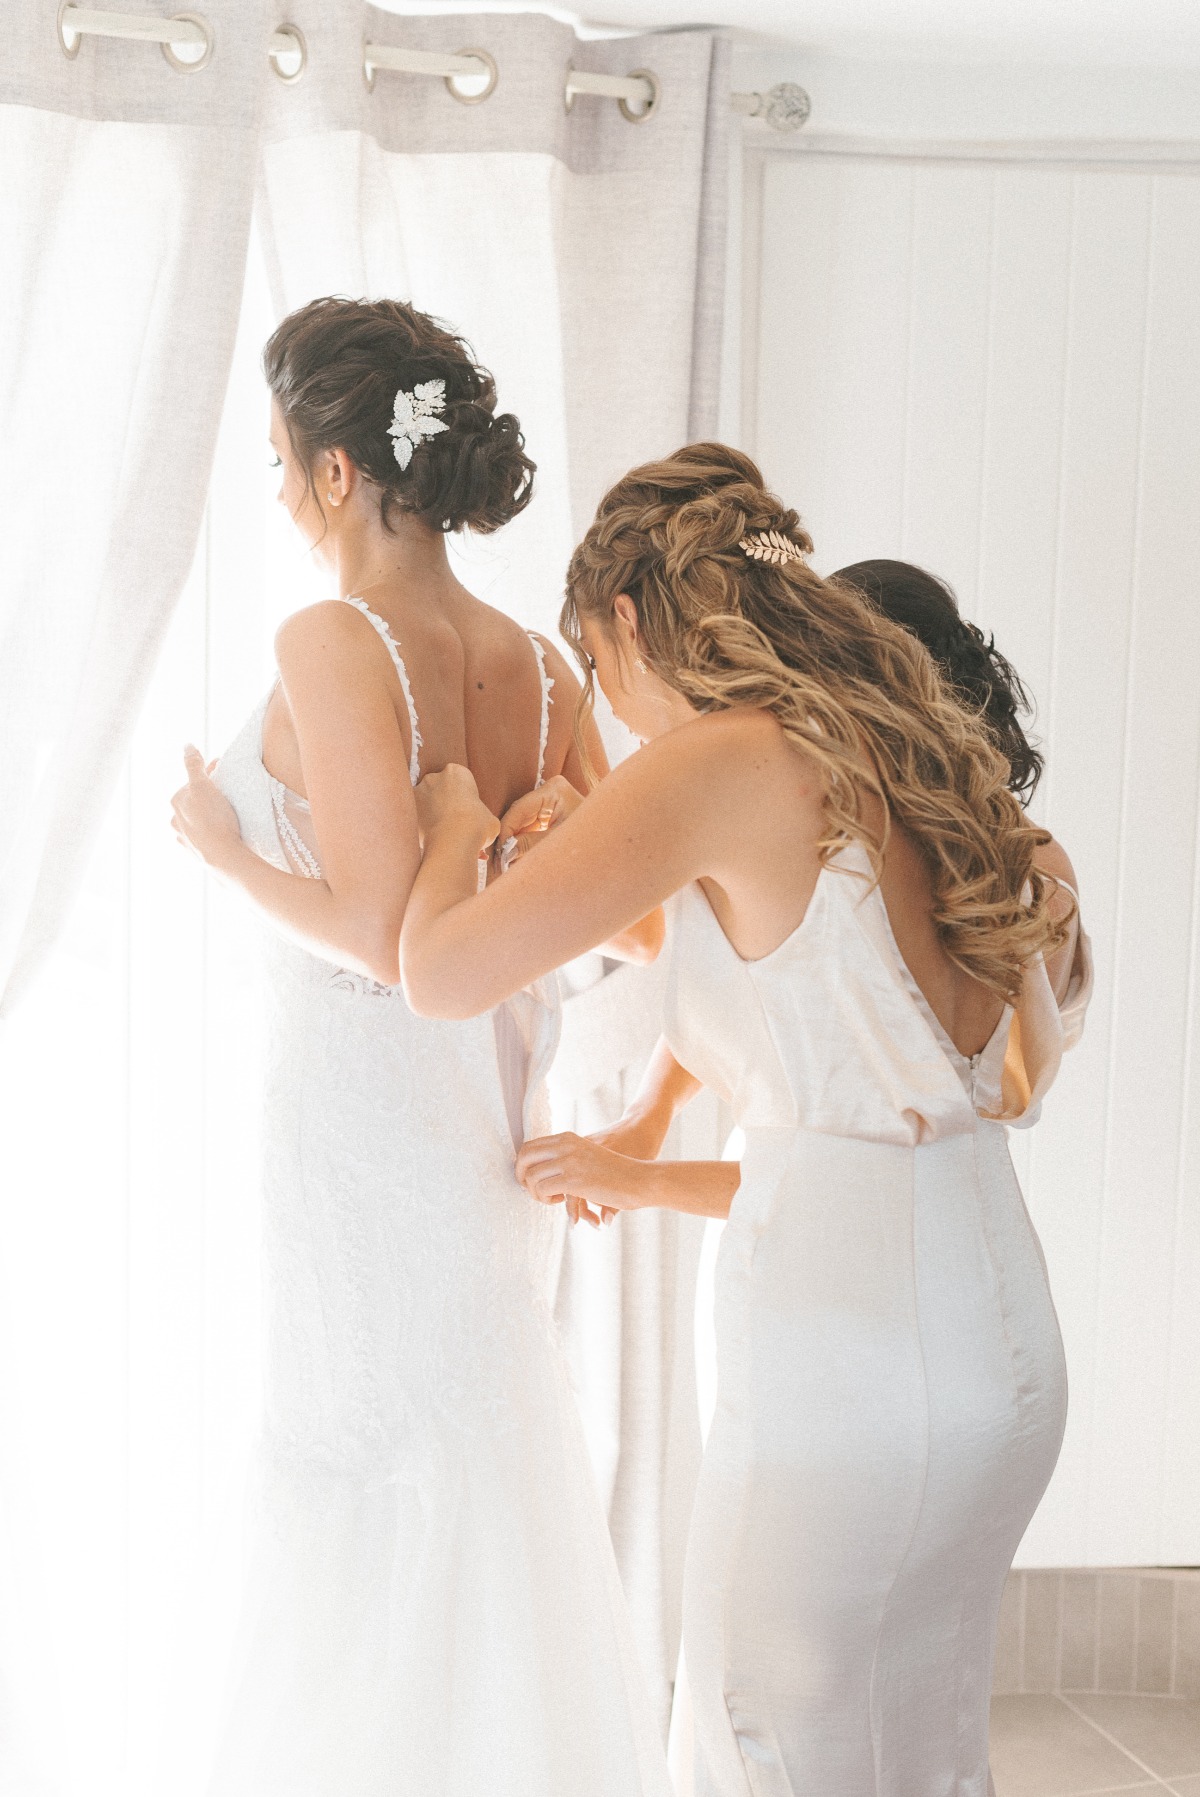 getting wedding ready with bridesmaids